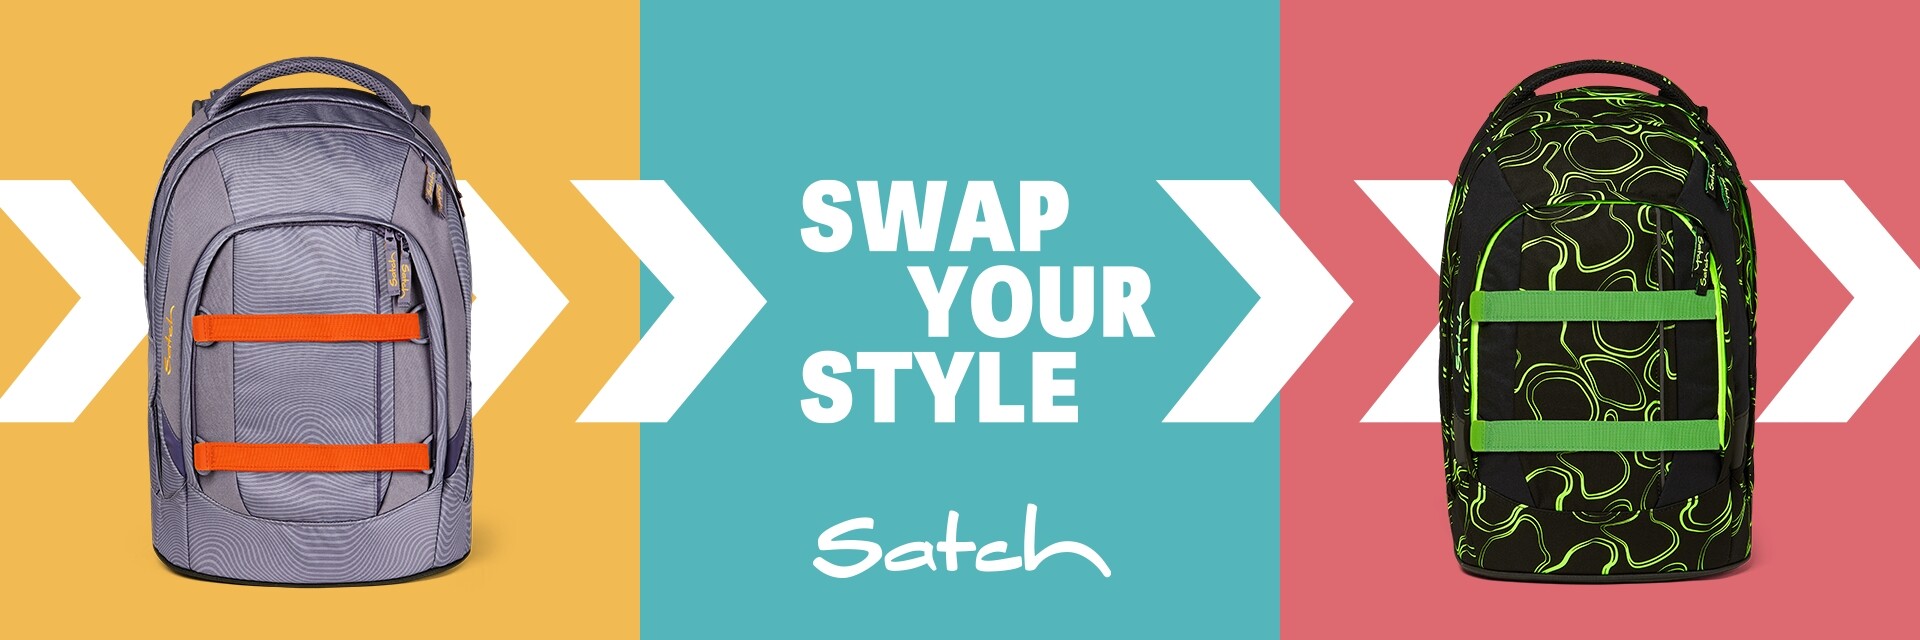 satch - swap your style HW22